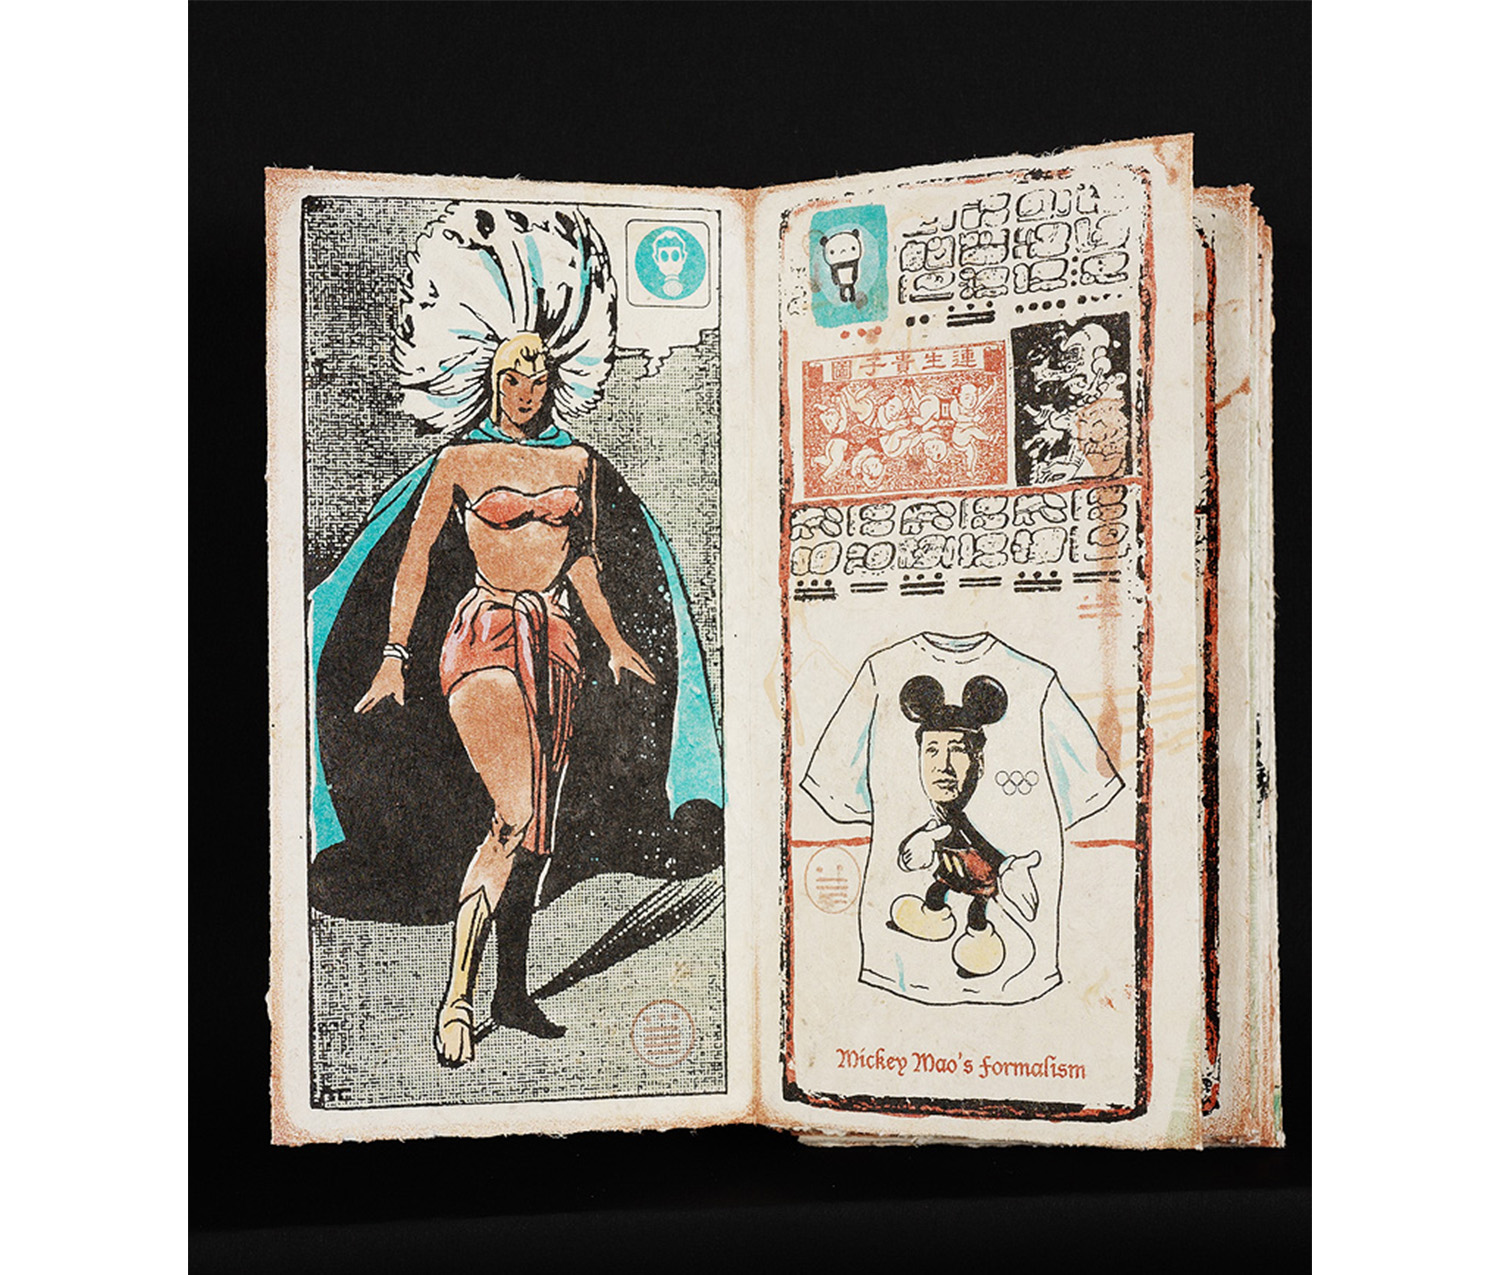 An open book. Left page: woman with blonde hair wearing red bikini, yellow boots, blue cape, and a white feathered headpiece. Right page: various drawings and symbols along the top; t-shirt of a man’s face on Mickey Mouse’s body on the bottom; red text at the bottom of the image reads, “Mickey Mao’s Formalism.”